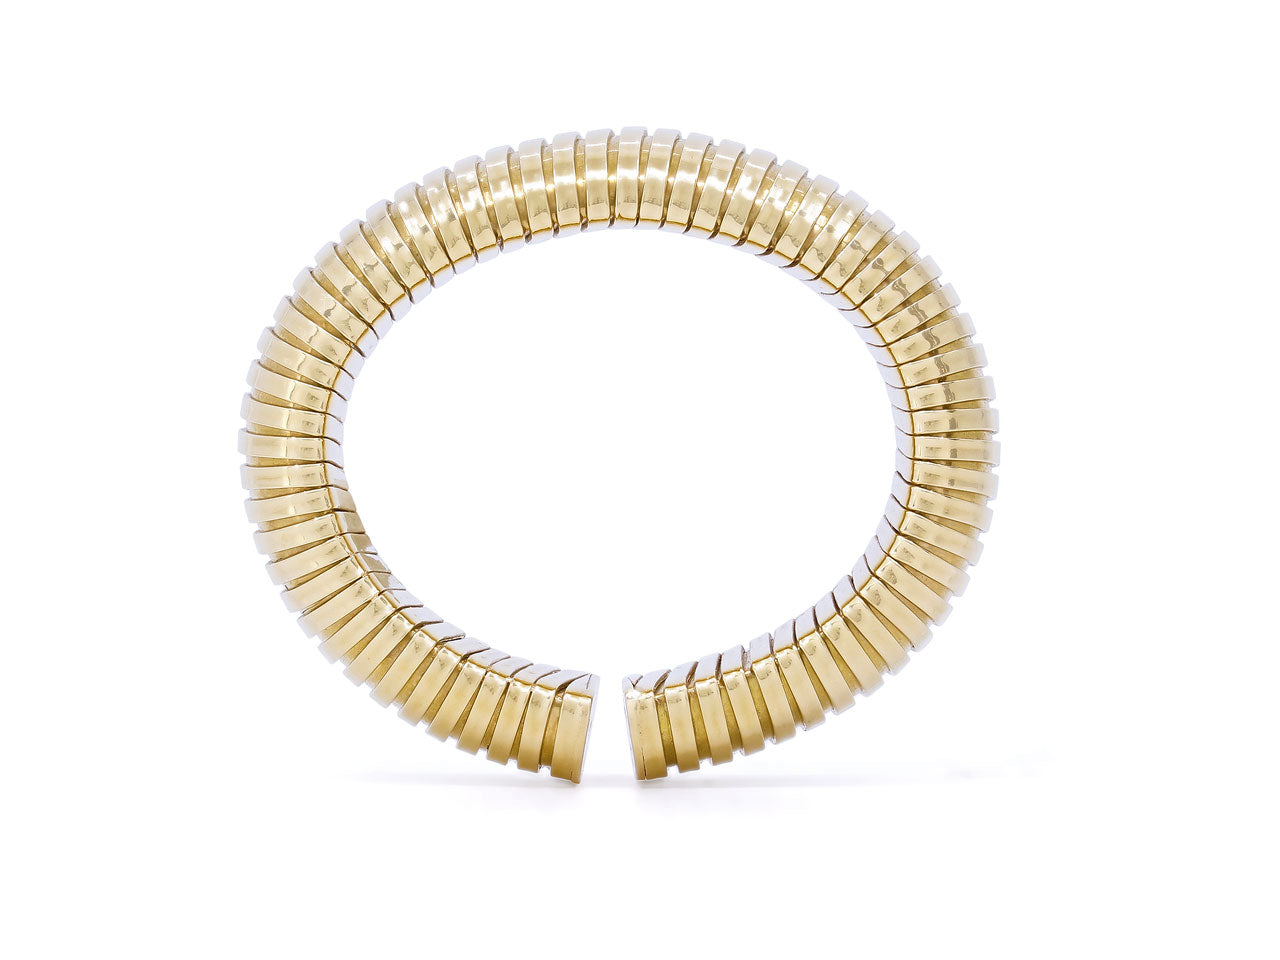 Domed Tubogas Cuff in 18K Yellow Gold, Size Small